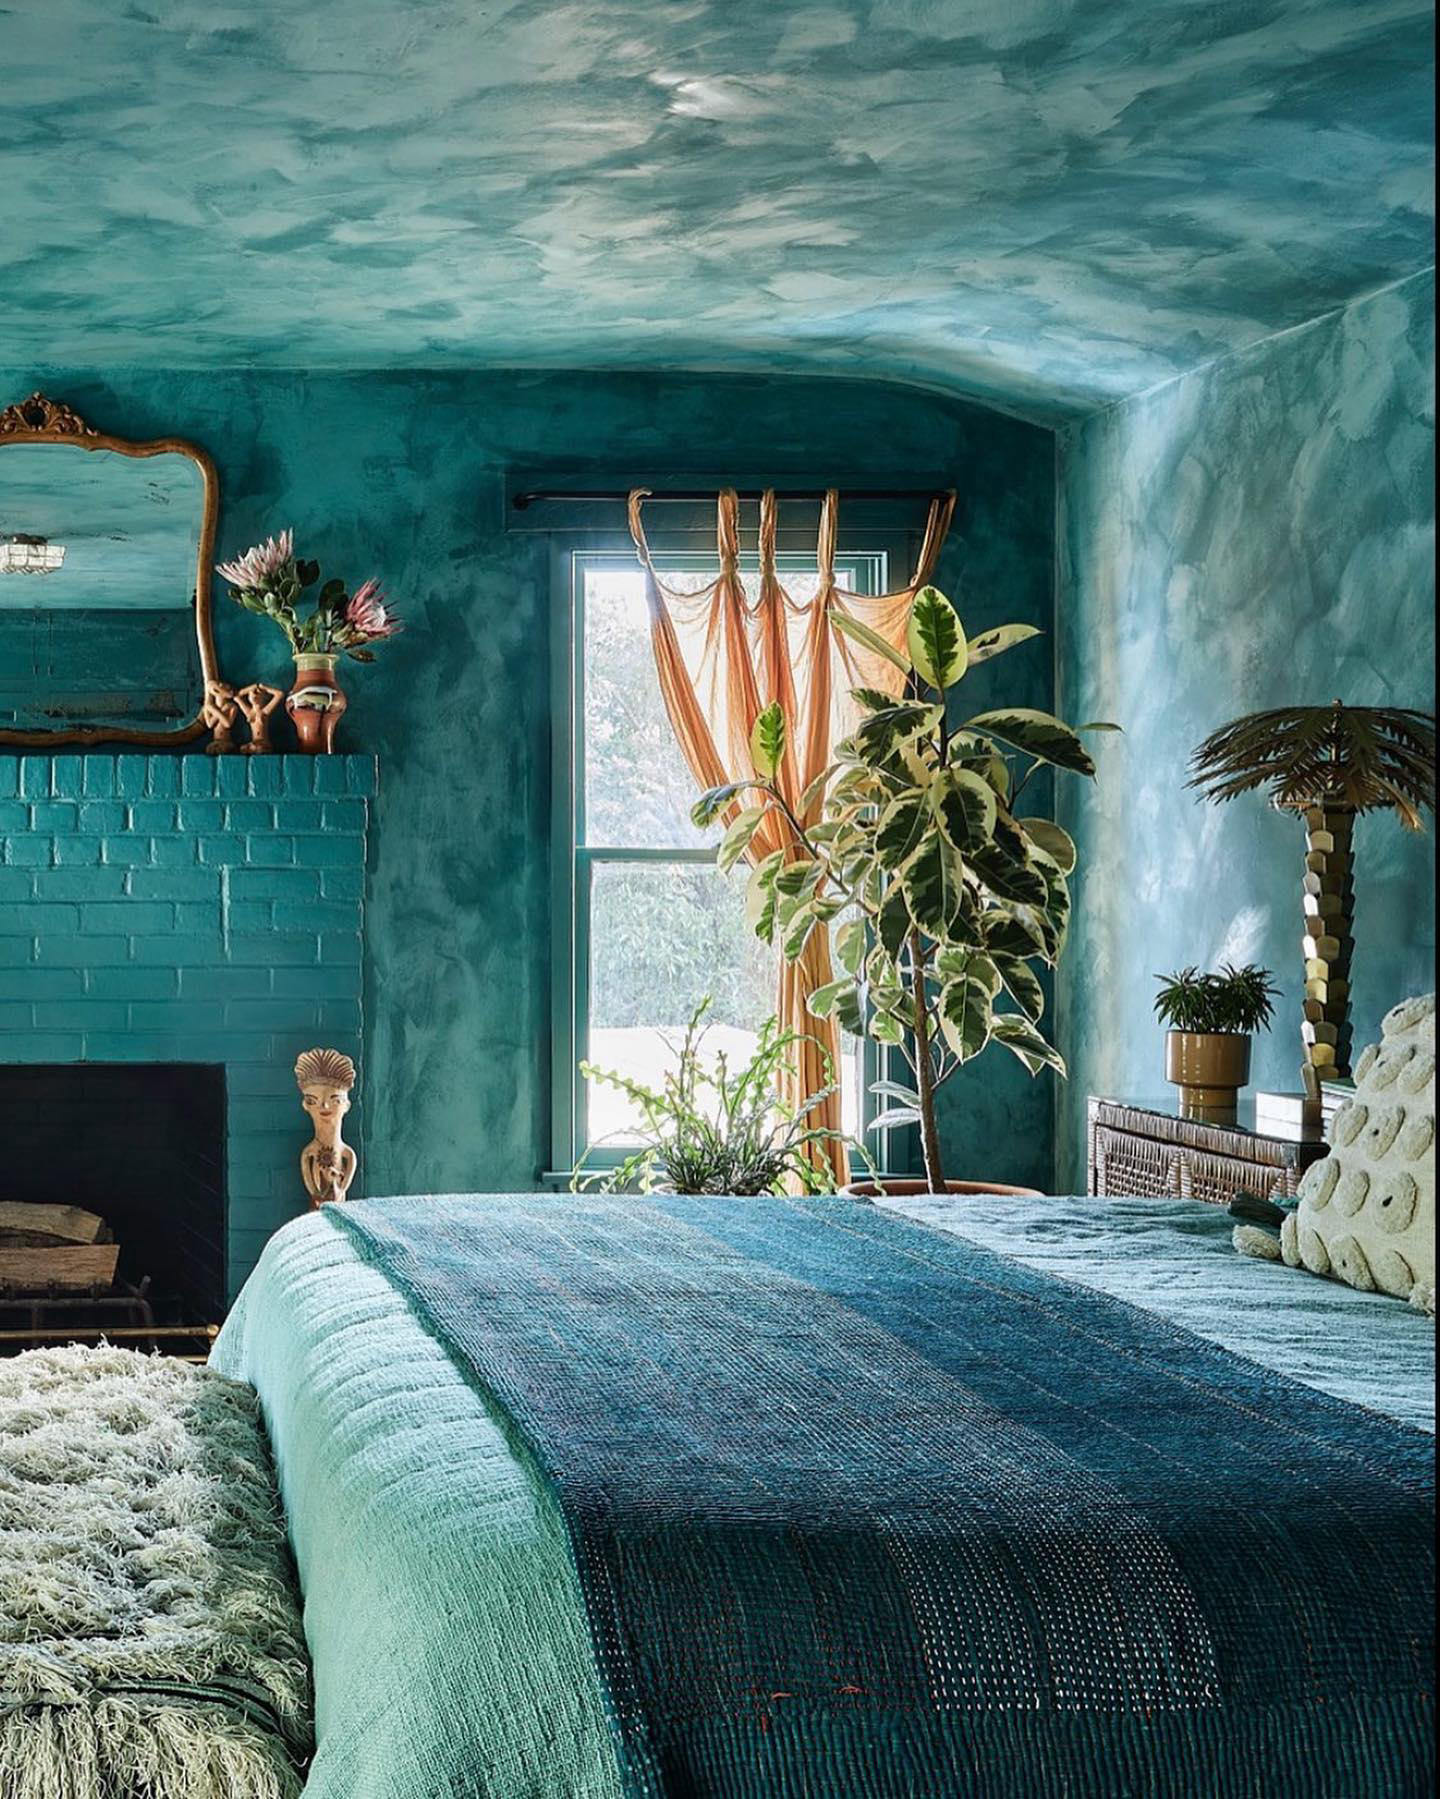 image  1 *the teal limewash* The moment I walked in after the room was painted I had *gasped*